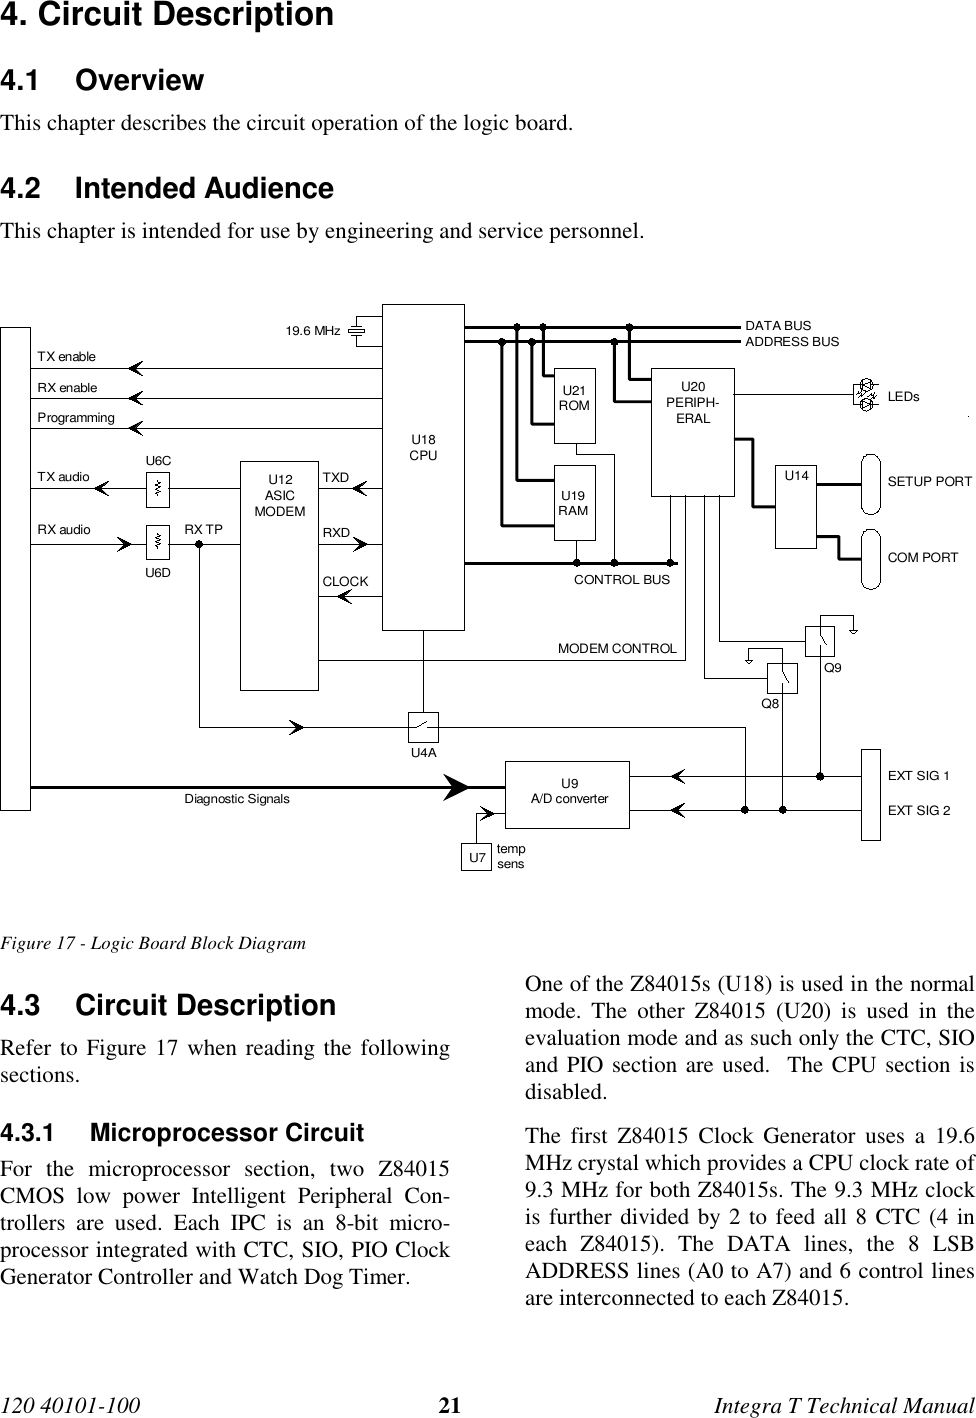 120 40101-100 21 Integra T Technical Manual4. Circuit Description4.1 OverviewThis chapter describes the circuit operation of the logic board.4.2 Intended AudienceThis chapter is intended for use by engineering and service personnel.Figure 17 - Logic Board Block Diagram4.3 Circuit DescriptionRefer to Figure 17 when reading the followingsections.4.3.1 Microprocessor CircuitFor the microprocessor section, two Z84015CMOS low power Intelligent Peripheral Con-trollers are used. Each IPC is an 8-bit micro-processor integrated with CTC, SIO, PIO ClockGenerator Controller and Watch Dog Timer.One of the Z84015s (U18) is used in the normalmode. The other Z84015 (U20) is used in theevaluation mode and as such only the CTC, SIOand PIO section are used.  The CPU section isdisabled.The first Z84015 Clock Generator uses a 19.6MHz crystal which provides a CPU clock rate of9.3 MHz for both Z84015s. The 9.3 MHz clockis further divided by 2 to feed all 8 CTC (4 ineach Z84015). The DATA lines, the 8 LSBADDRESS lines (A0 to A7) and 6 control linesare interconnected to each Z84015.U12ASICMODEMU18CPUU9A/D converterU20PERIPH-ERALU21ROMU19RAMtempsensU7U6CU6DQ8Q9U4AU14DATA BUSADDRESS BUSCONTROL BUSDiagnostic SignalsTX enableRX enableTX audioRX audio RX TPEXT SIG 1EXT SIG 2SETUP PORTCOM PORTLEDs19.6 MHzProgrammingRXDTXDCLOCKMODEM CONTROL